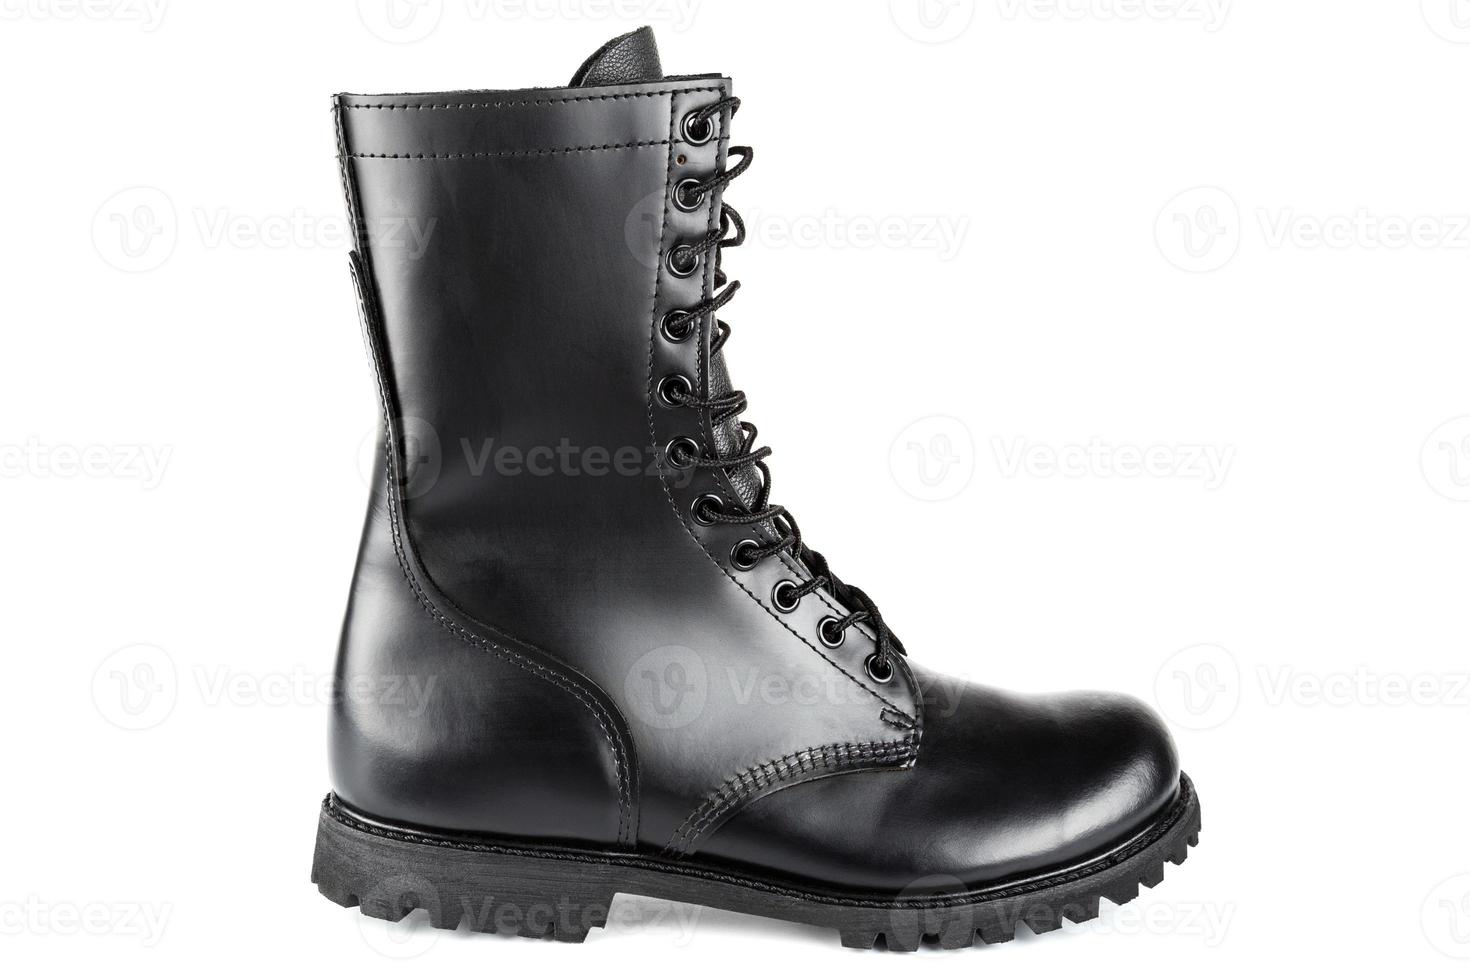 side view of black leather 10-inch new black military combat boot, isolated on white background photo